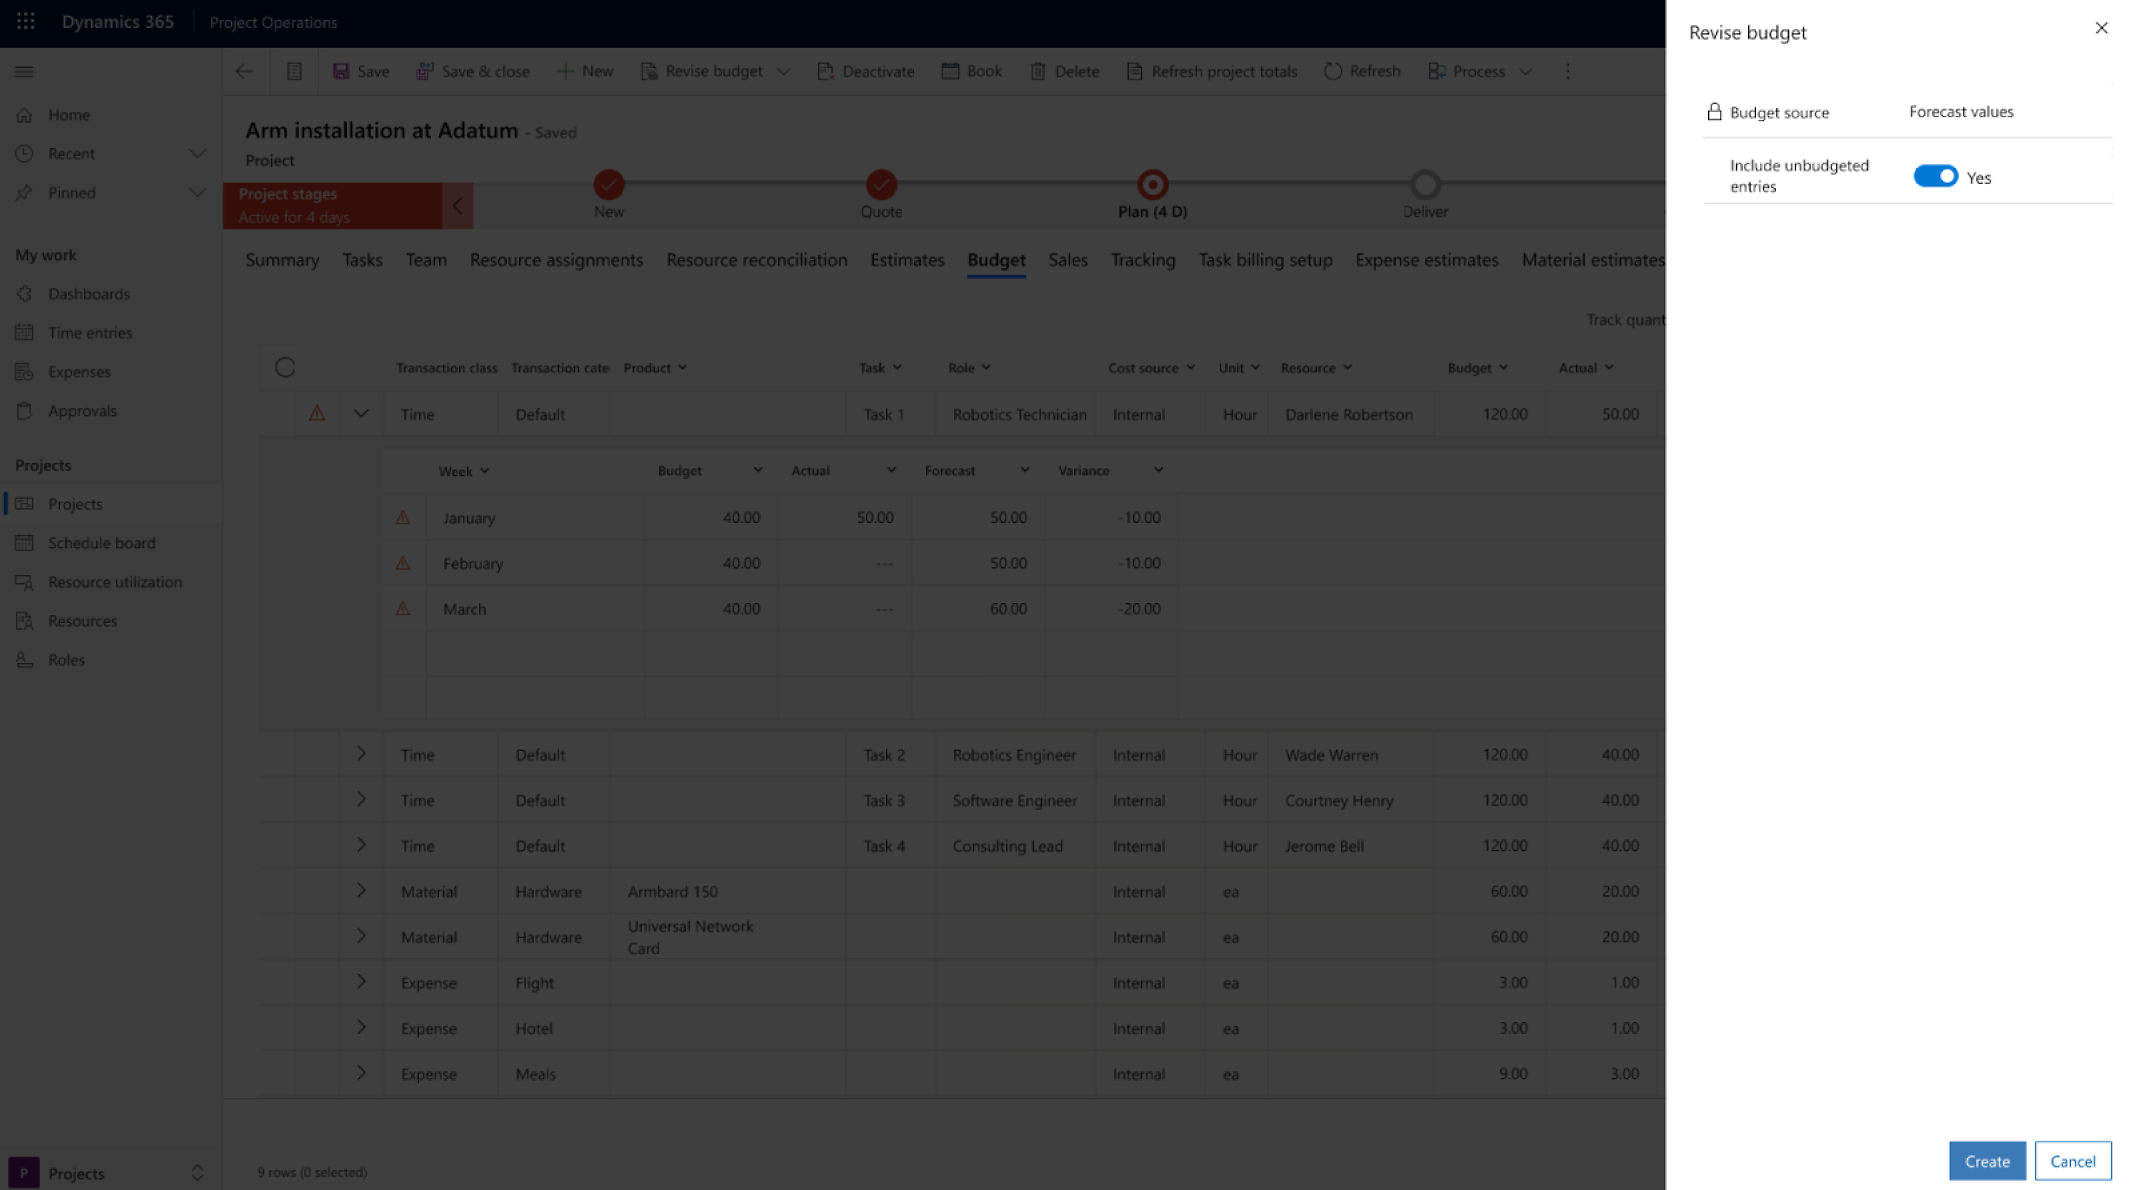 Screenshot of a budget review interface in microsoft dynamics 365 with a focus on project operations